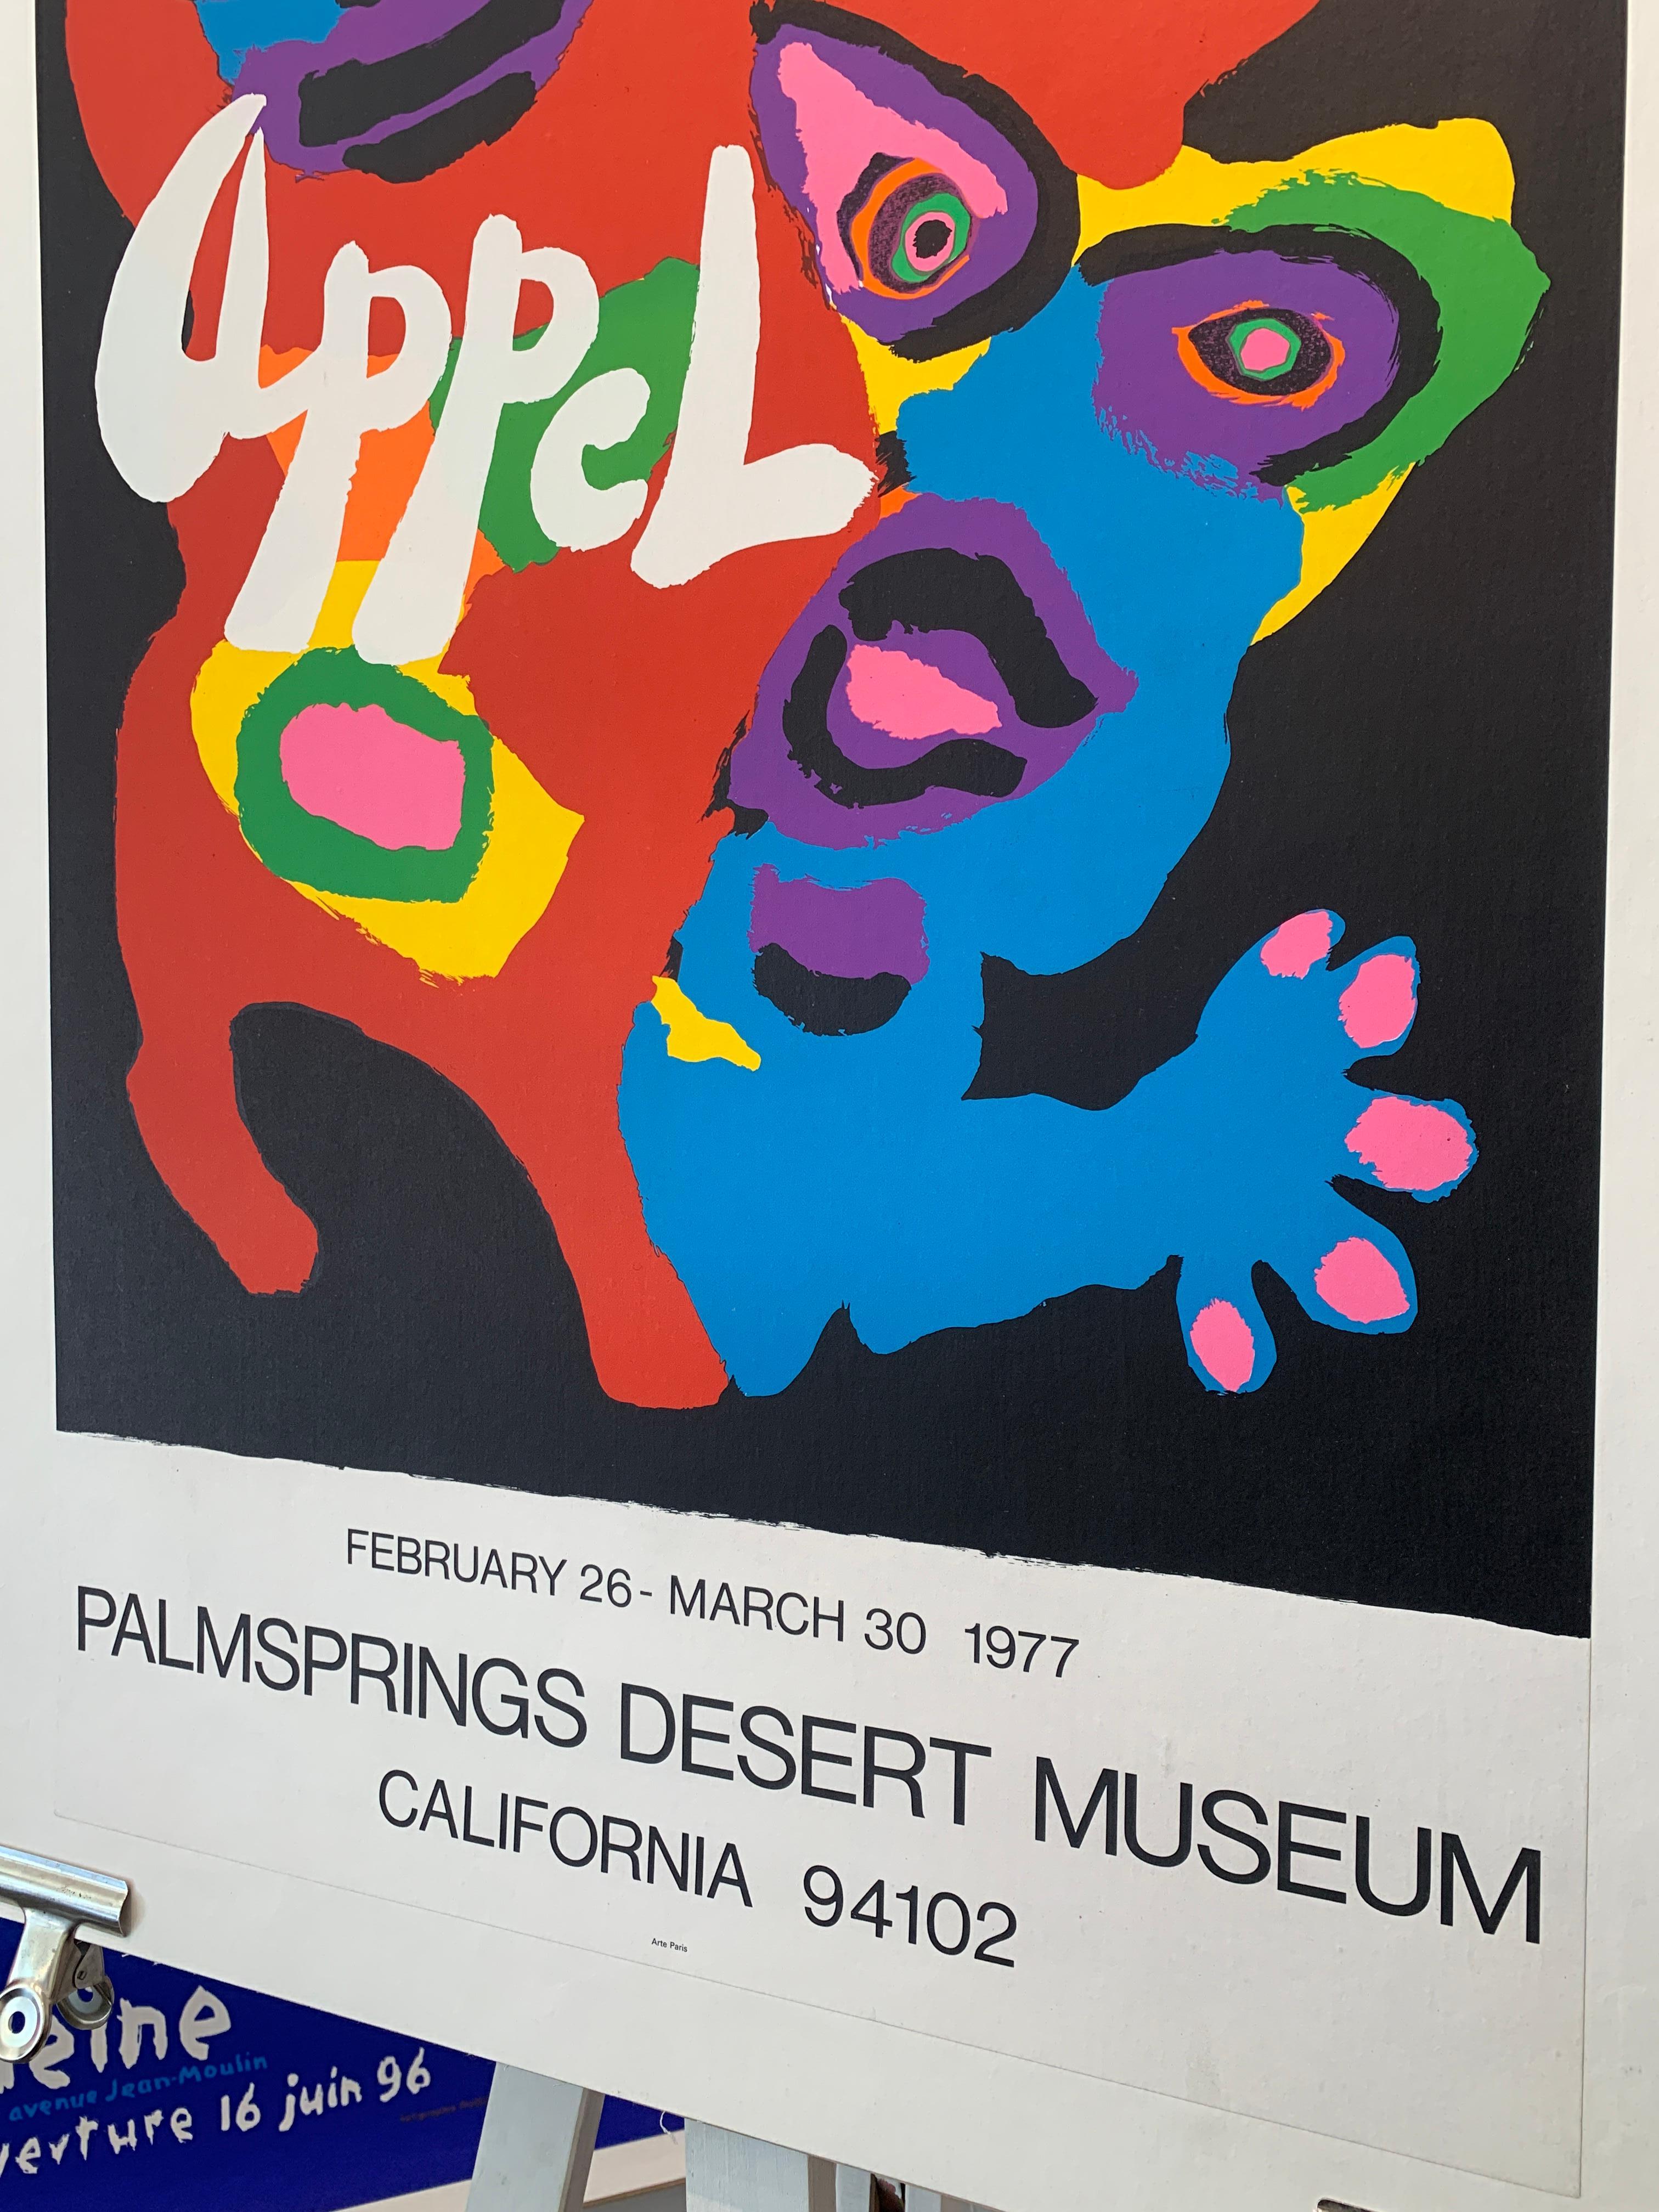 'Appel Palm Springs Desert Museum' Original Art Exhibition Poster, 1977 In Good Condition For Sale In Melbourne, Victoria